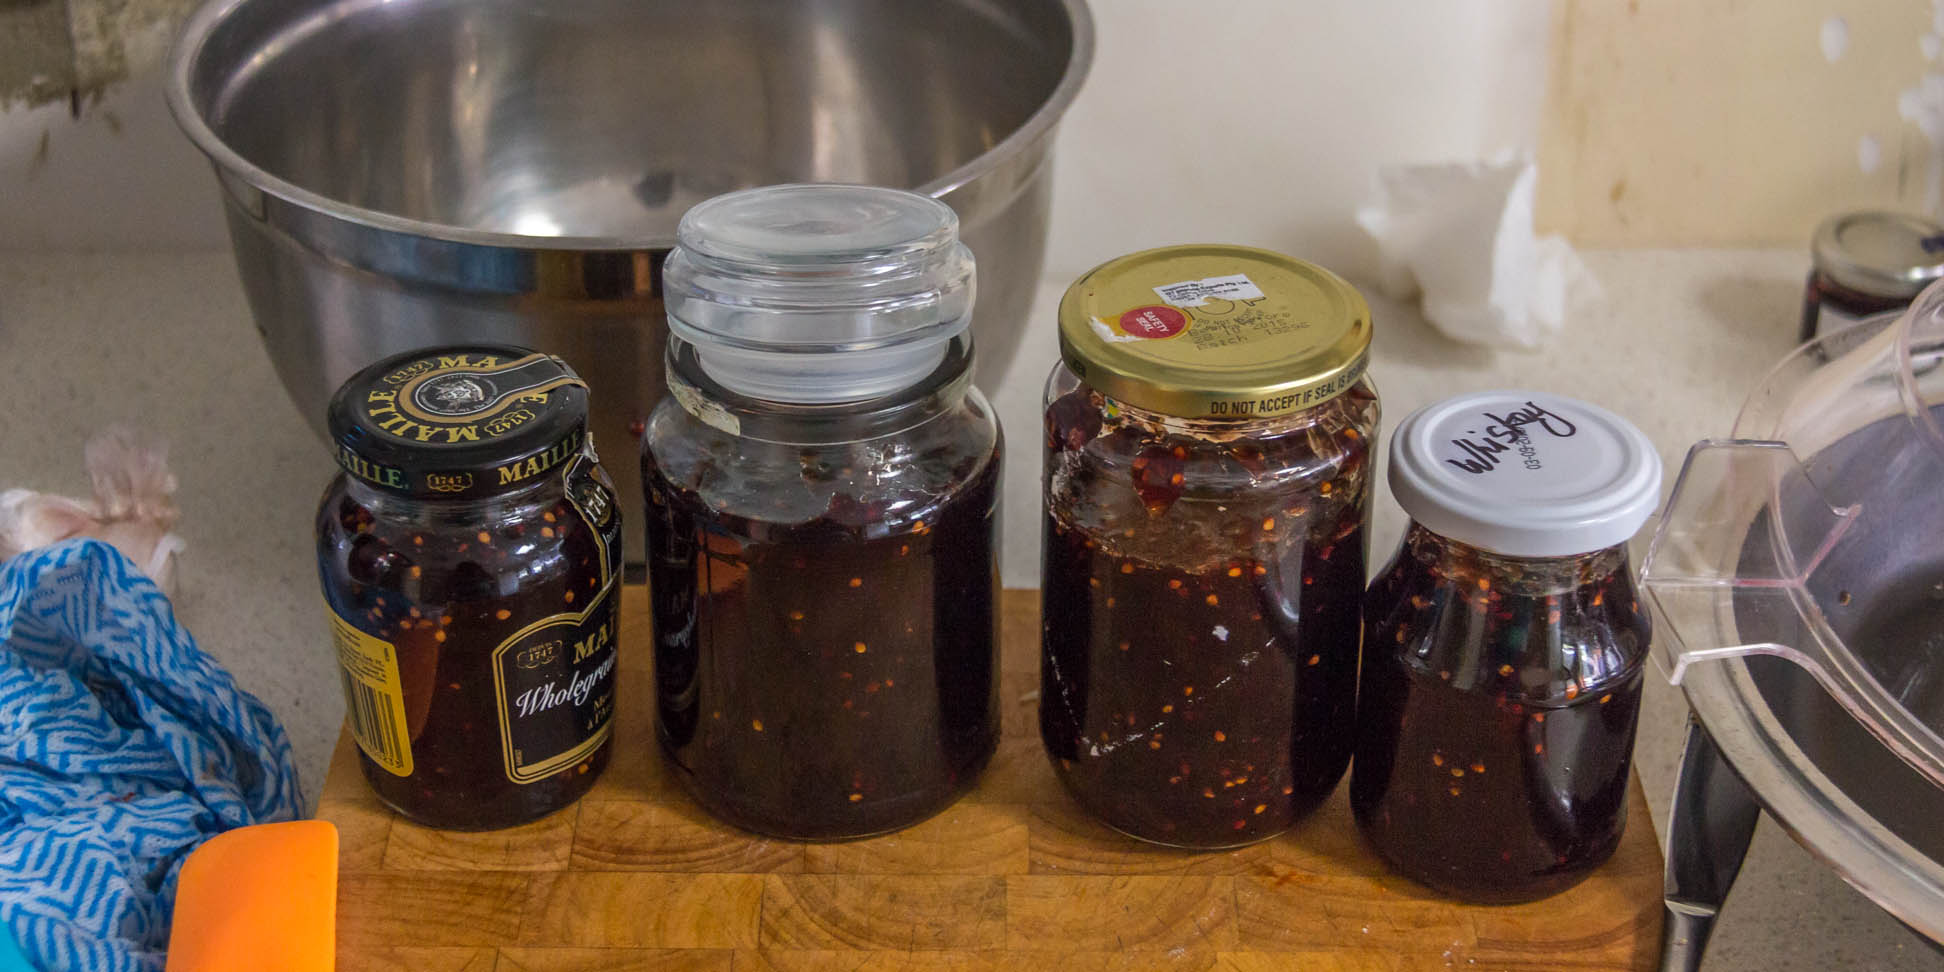 4 jars of mulberry jam on a wooden cutting board